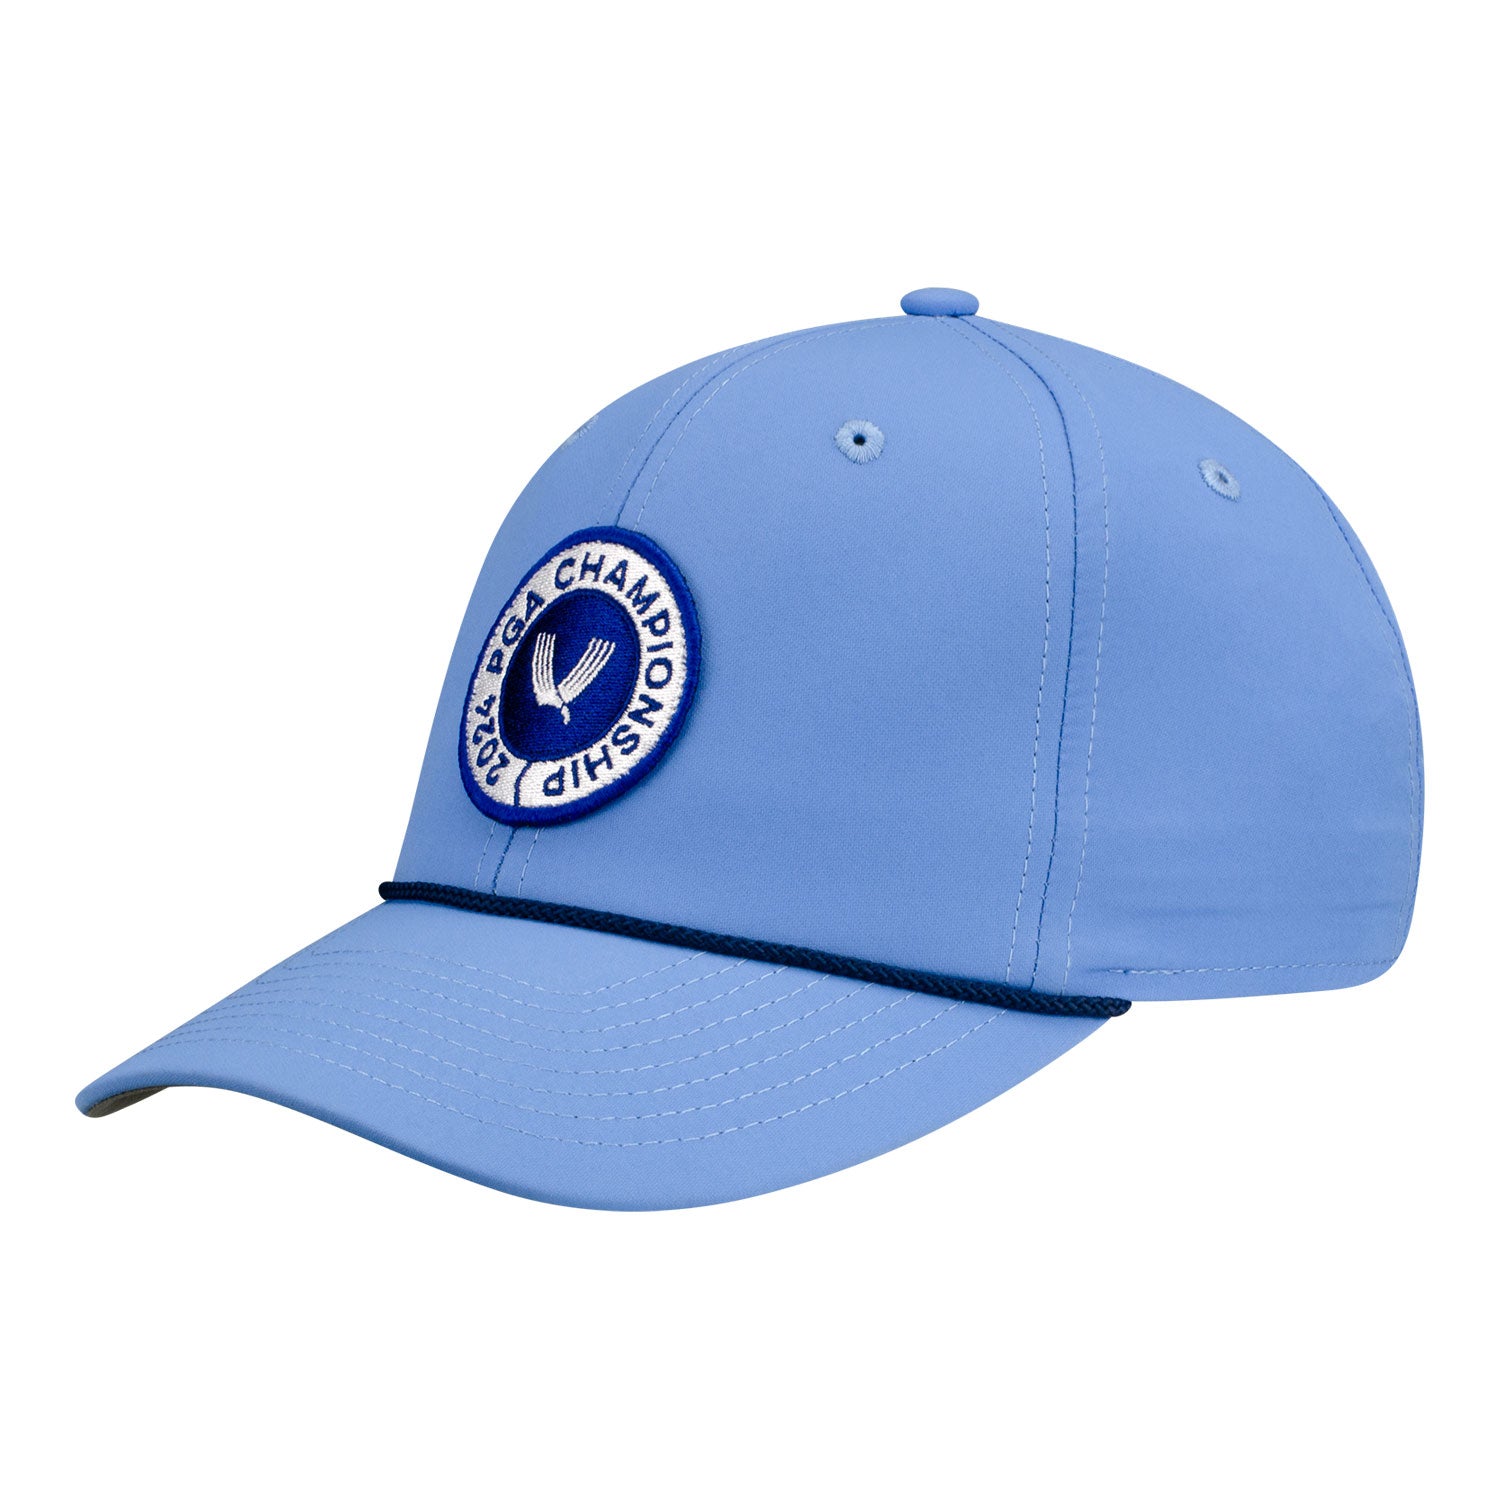 Imperial 7054 - The Wingman 6 - Panel Performance Rope in Light Blue / White - Front Left View